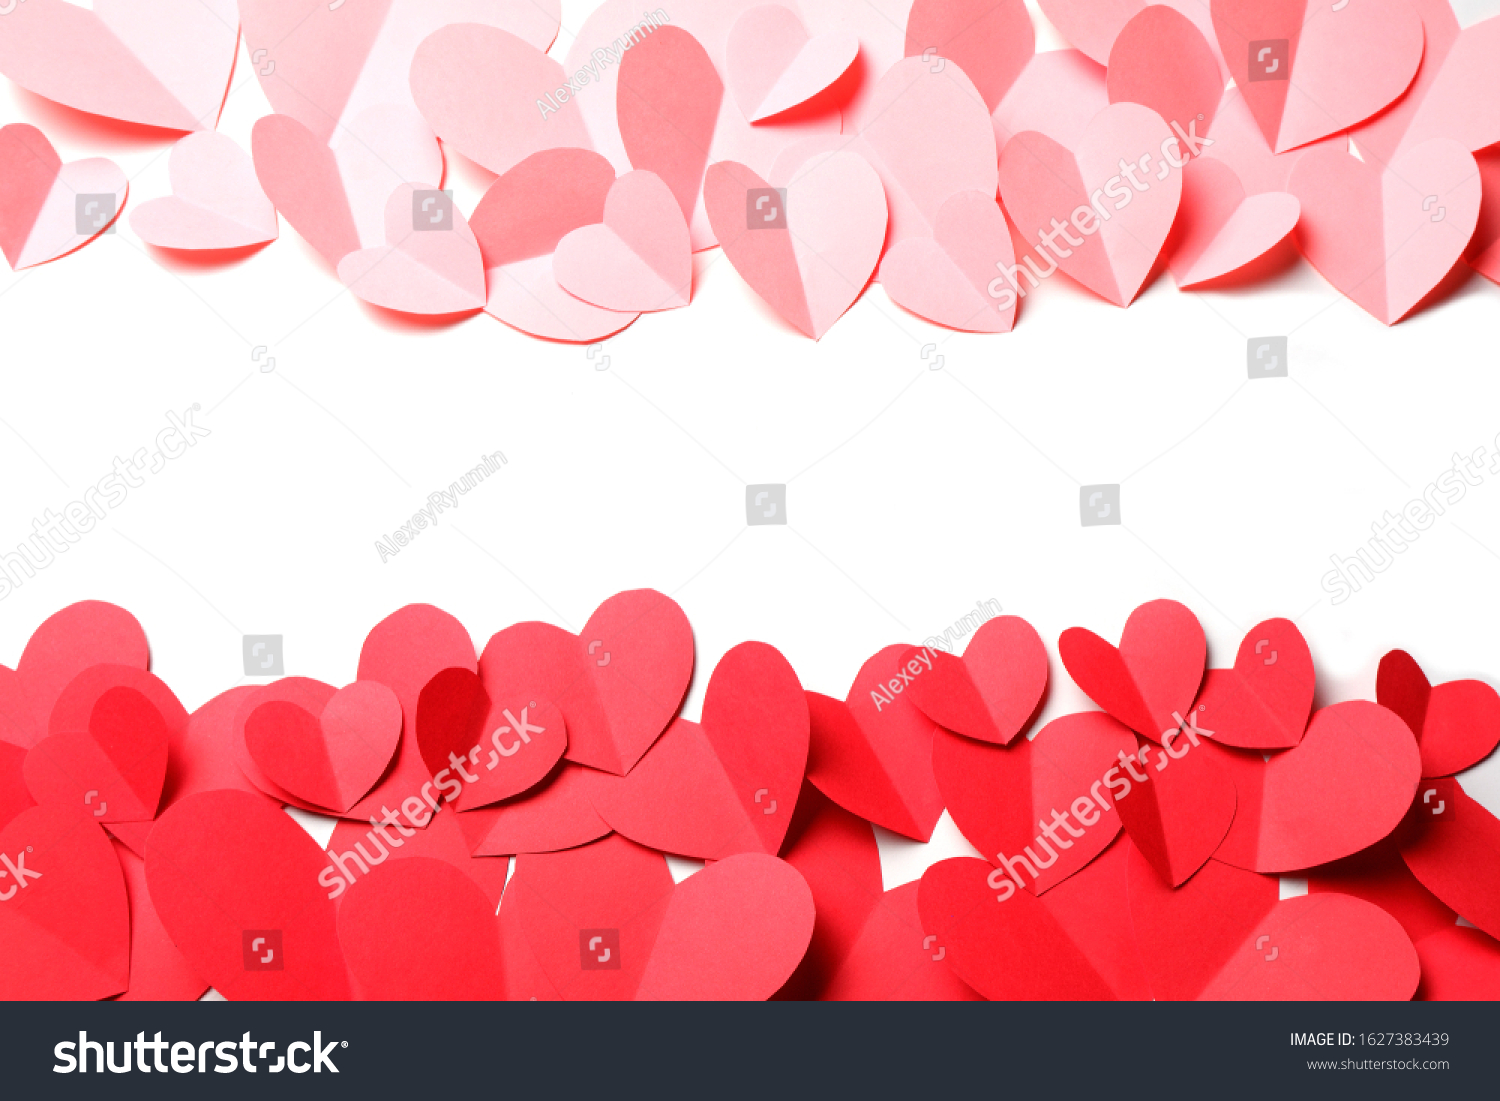 Cut out of red and pink paper hearts on red background isolated. Beautiful Valentines day, Womans day, love, romantic or wedding composition with empty space for custom text for banner, congratulation, card, offer, flyer, advertising, invitation.